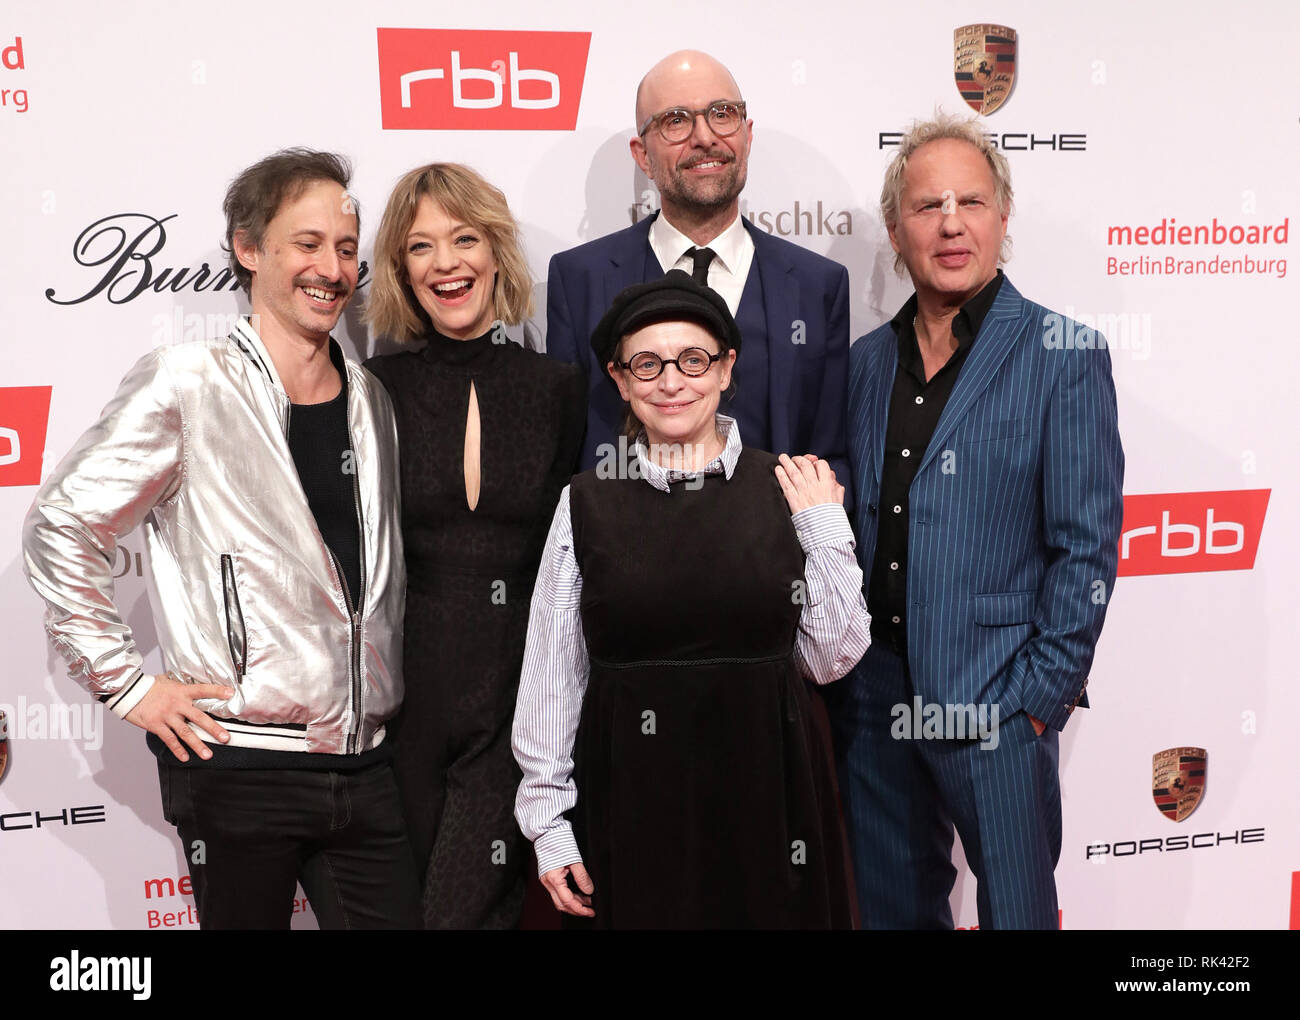 Berlin, Germany. 09th Feb, 2019. 69th Berlinale: The actors Michael Ostrowski (l-r), Heike Makatsch, Katharina Thalbach, director Philipp Stölzl and Uwe Ochsenknecht come to the Medienboard-Party. Credit: Jörg Carstensen/dpa/Alamy Live News Stock Photo